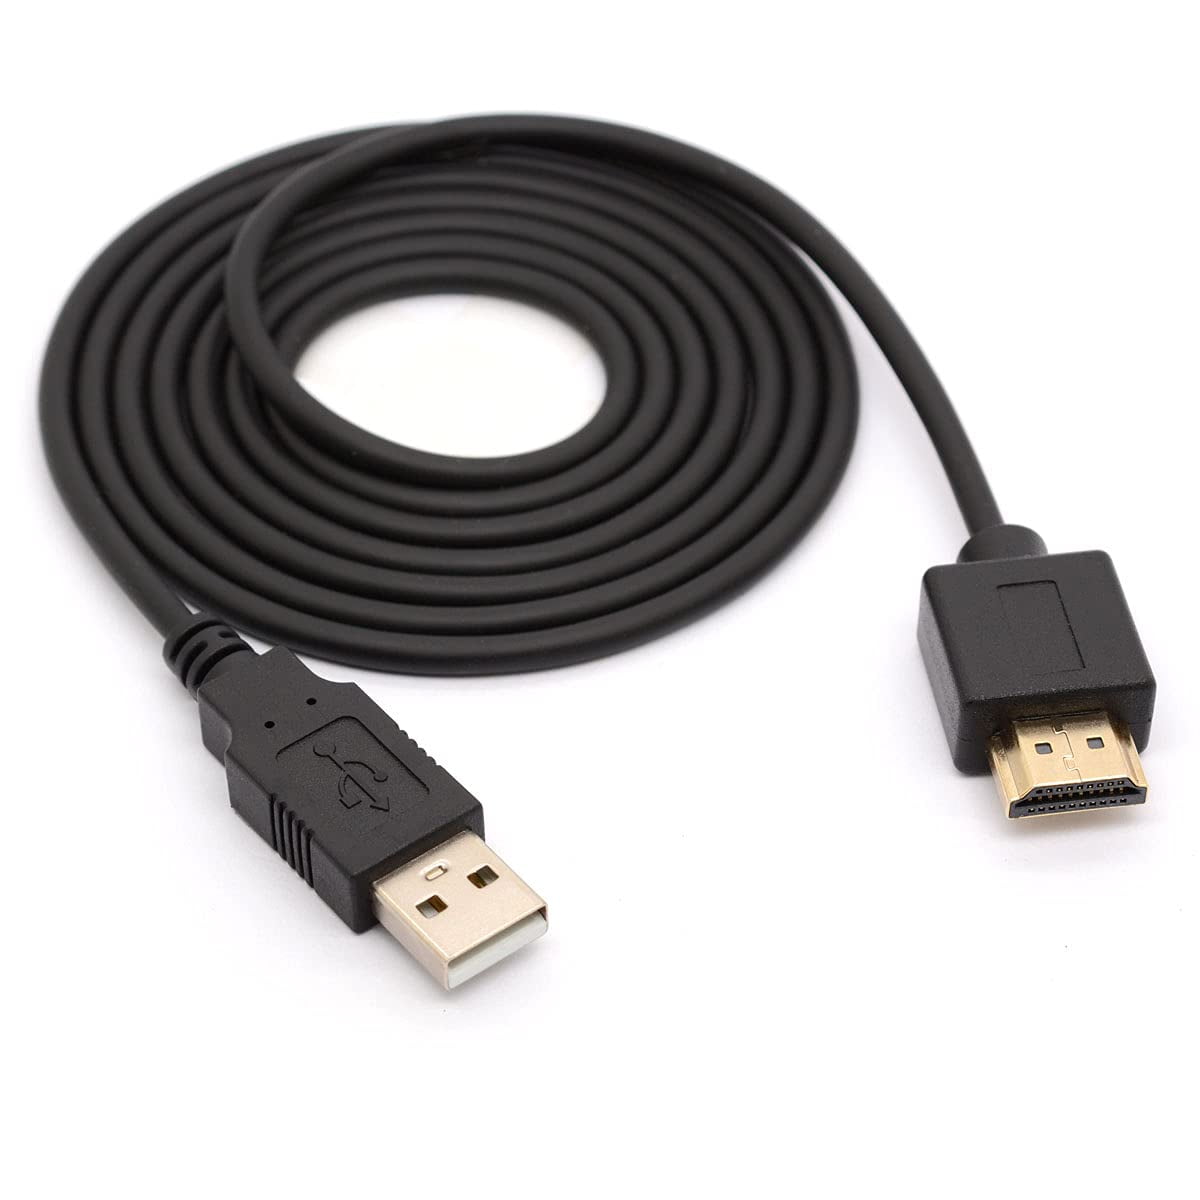 USB HDMI Adapter Cable Cord USB 2.0 Type A Male to Male Charging Converter (Only for Charging) (1.5 Meter) - Walmart.com